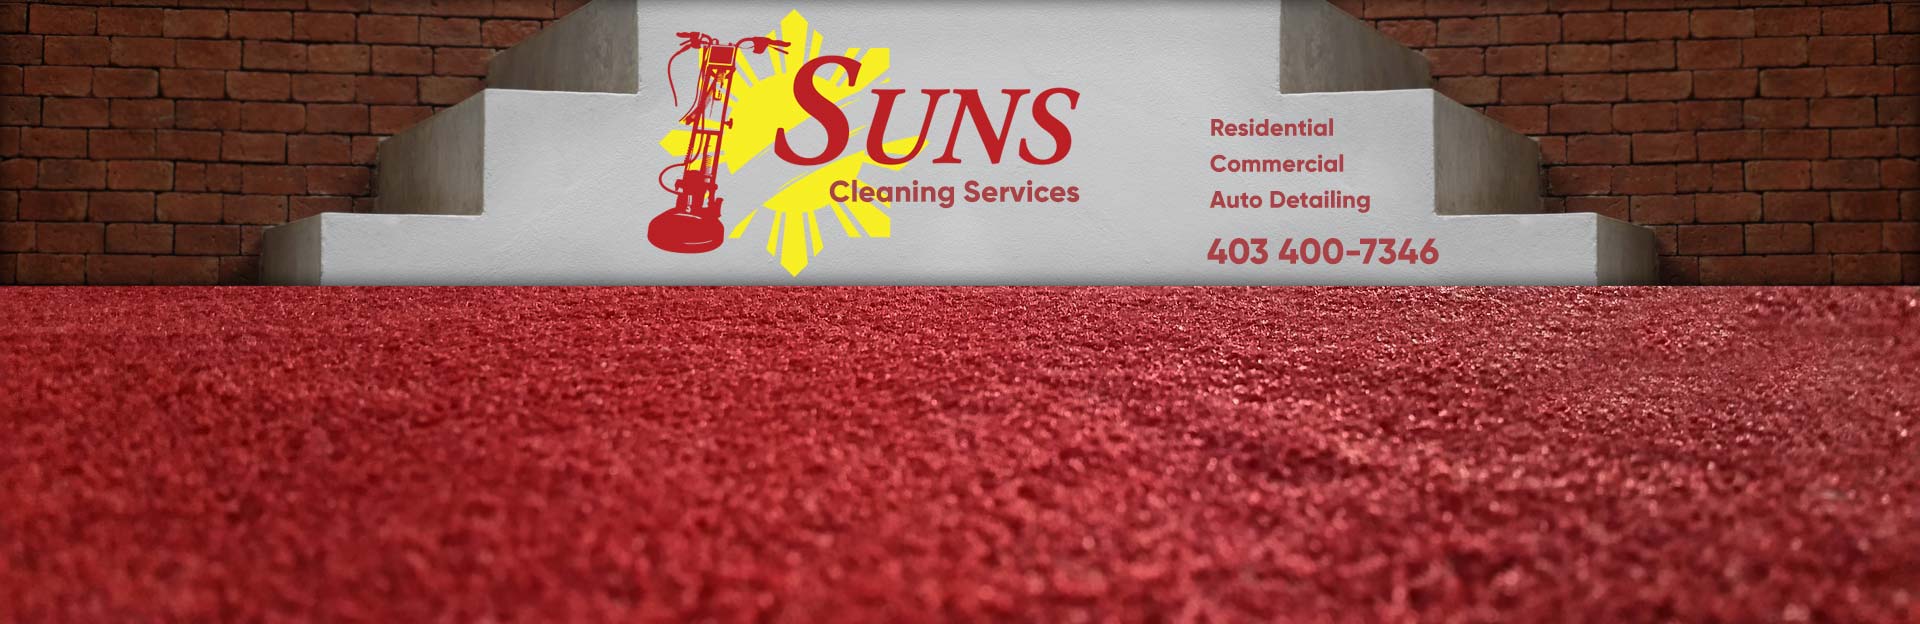 Suns Carpet Cleaning service in Calgary